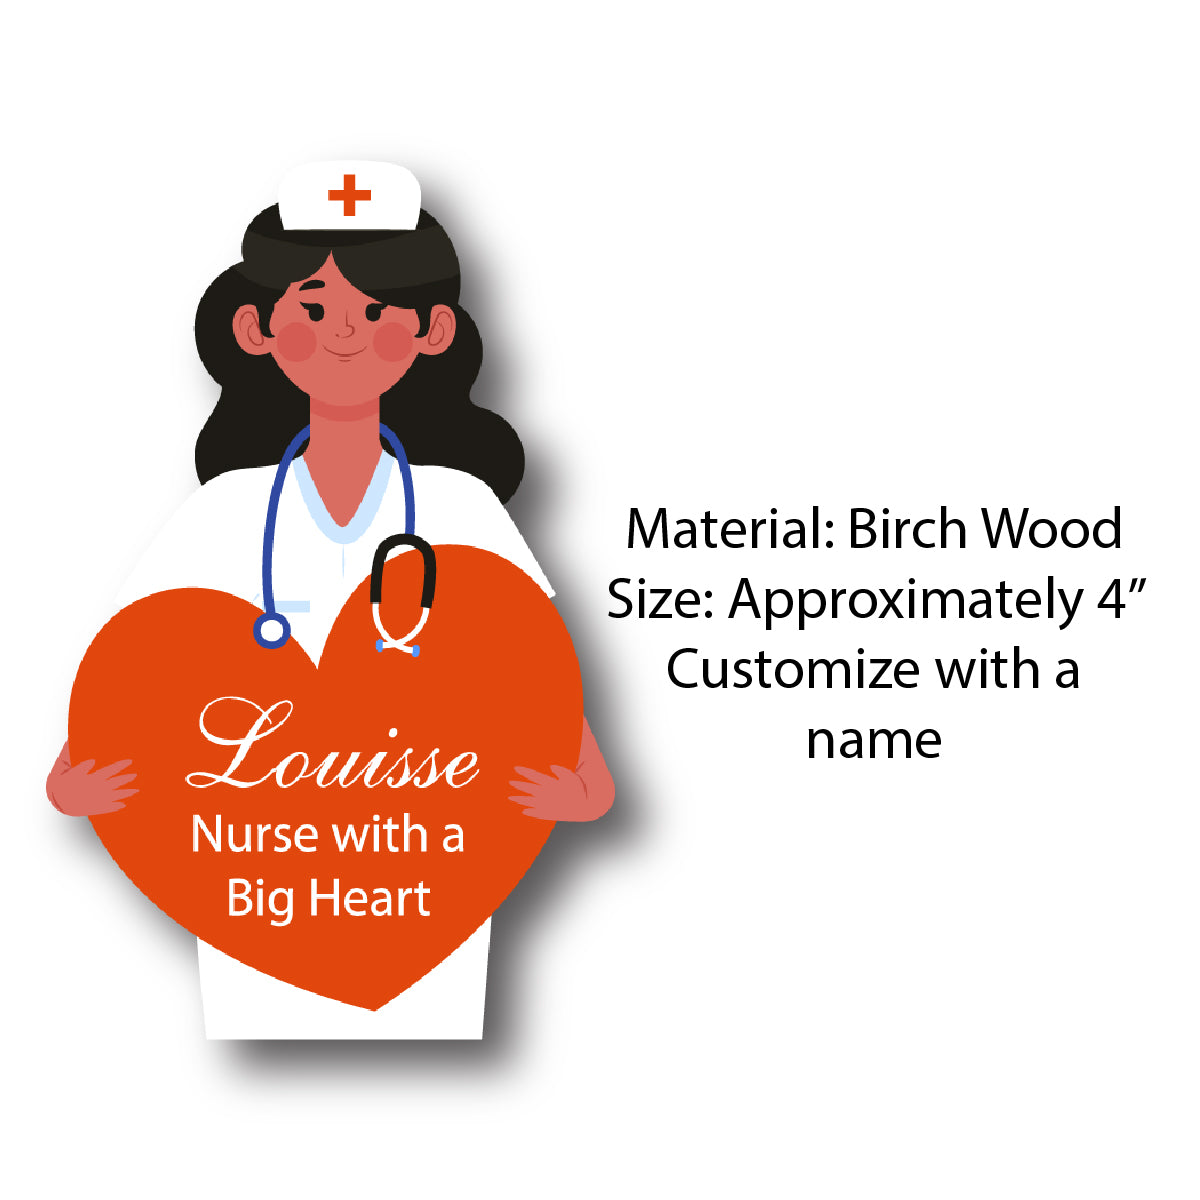 Christmas Nurse with a big heart ornaments,Christmas Ornament, Christmas Ornament Ideas,Christmas Ornaments Personalized, Laser Cut wood